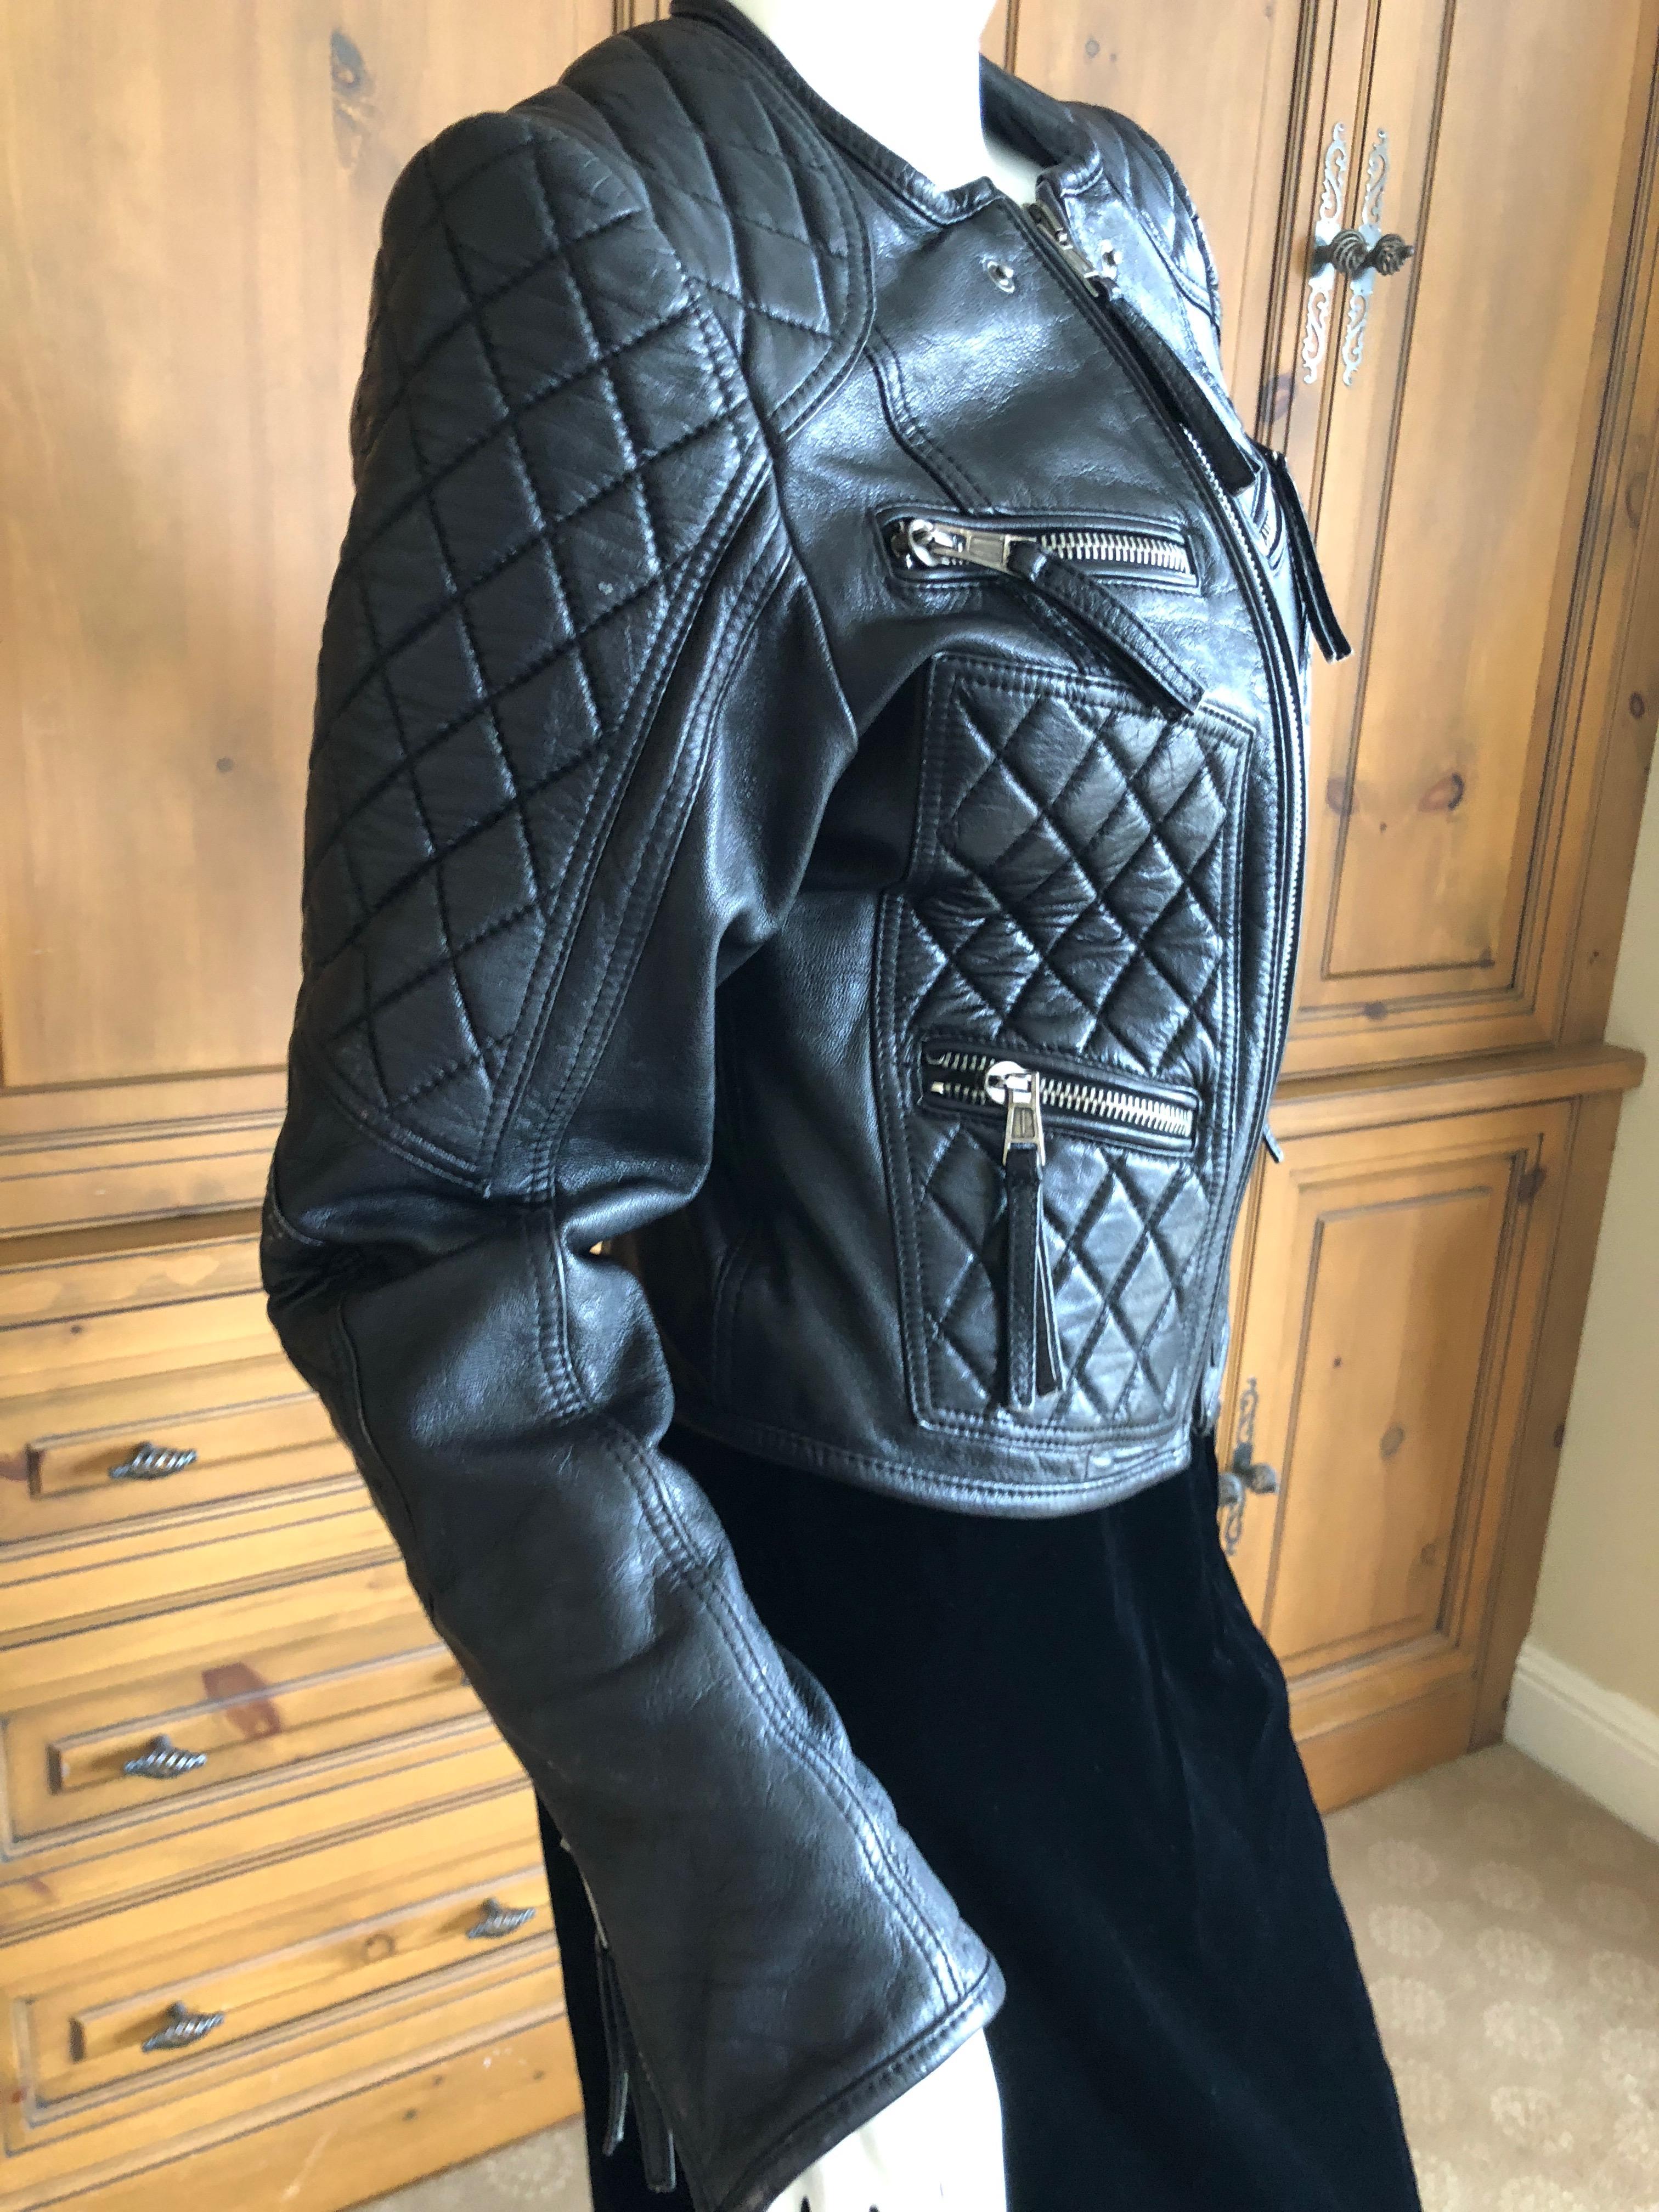 Roberto Cavalli Vintage Black Leather Quilted Motocross Zip Front Moto Jacket In Excellent Condition For Sale In Cloverdale, CA